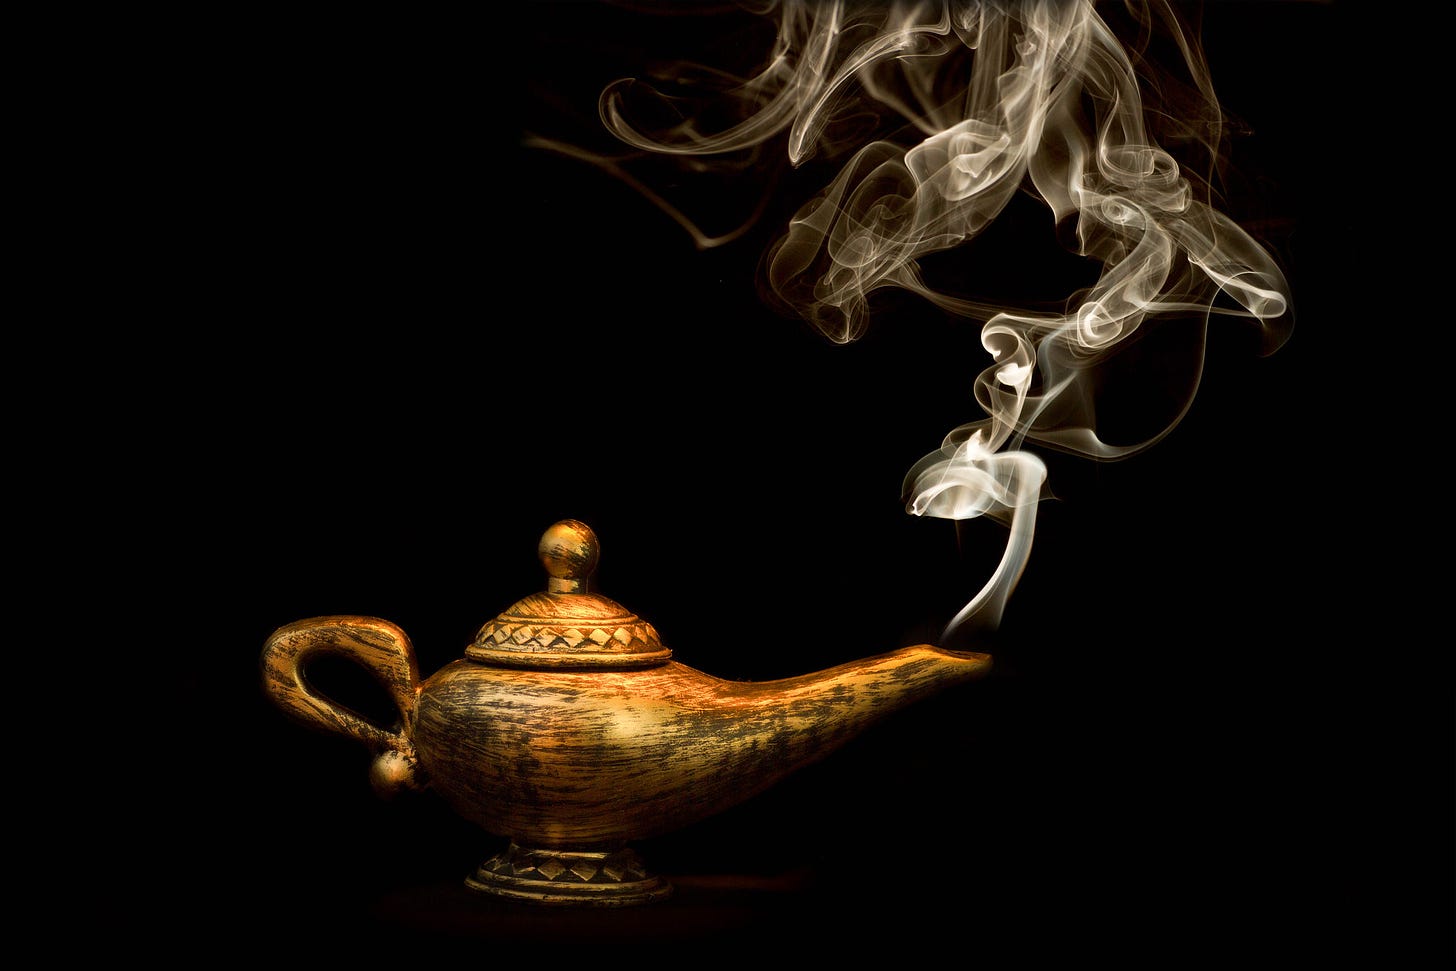 Image of a genie's lamp